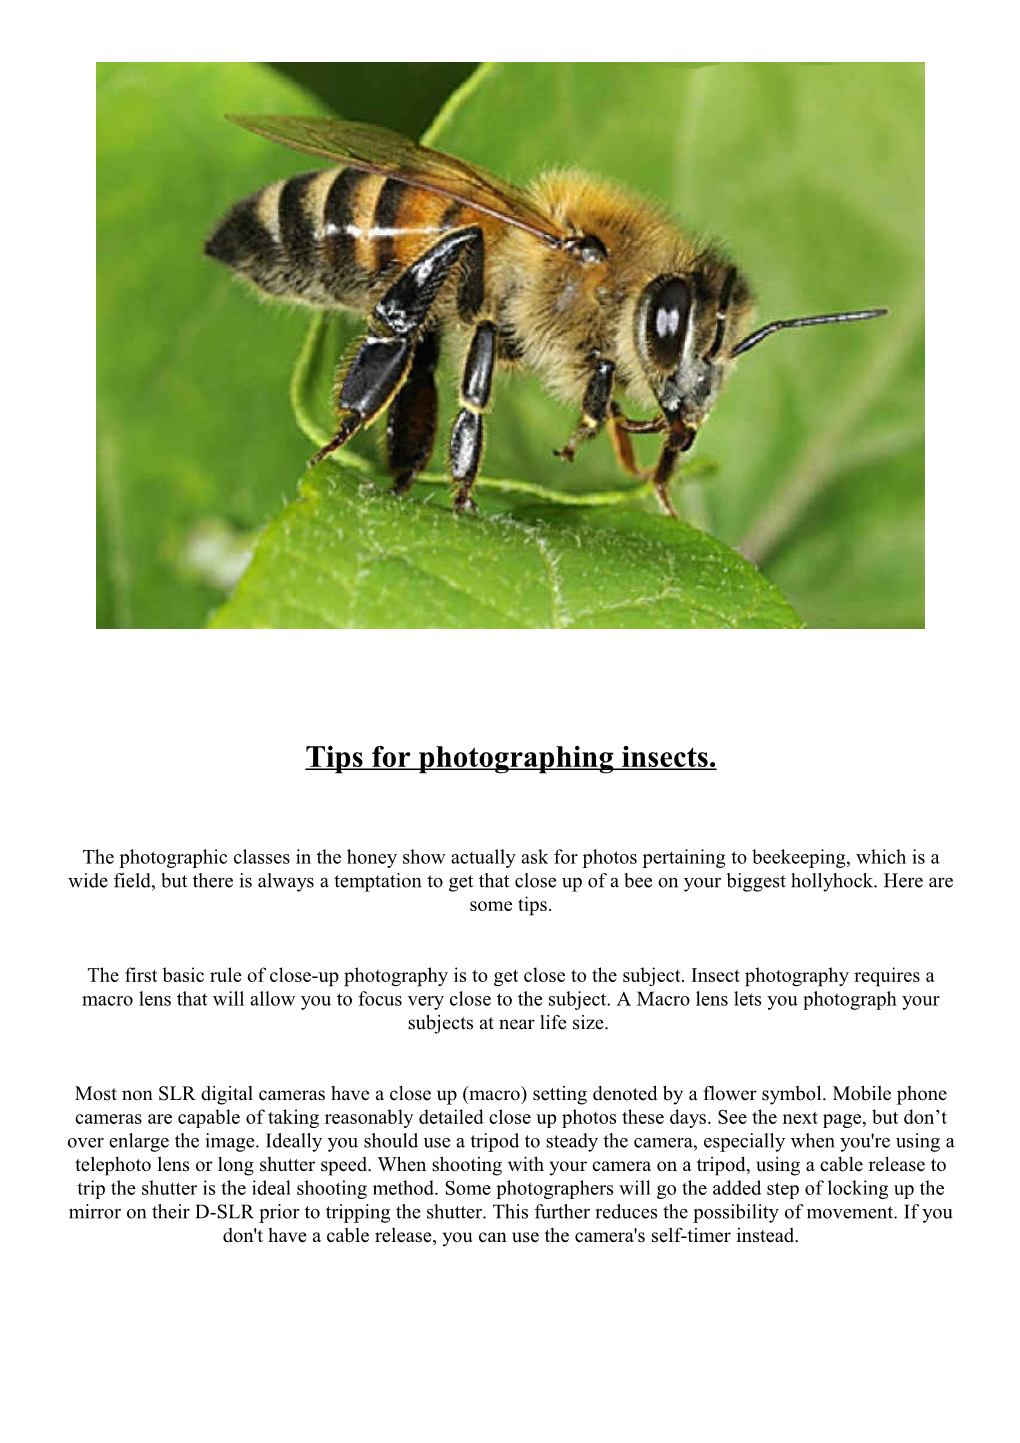 Tips for Photographing Insects